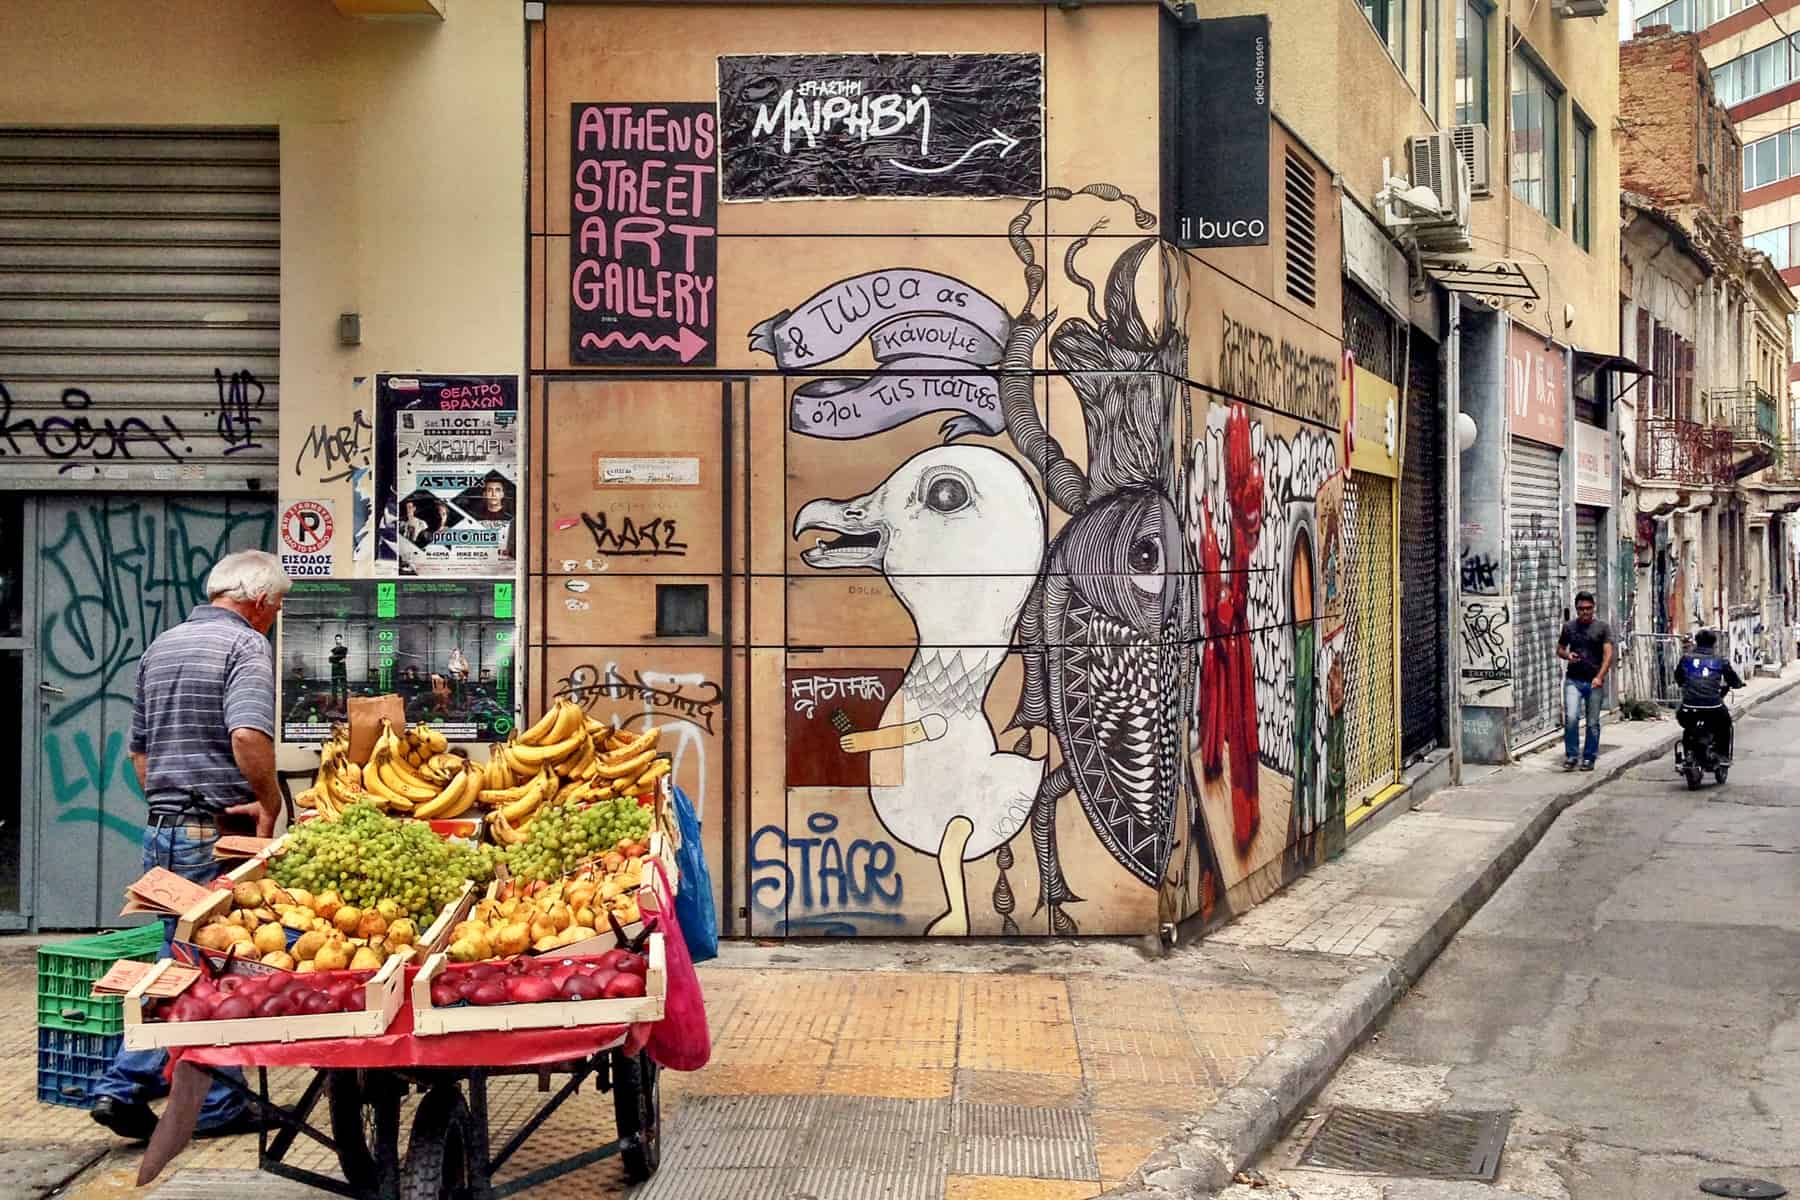 In Athens city, a man stands next to a cart full of bananas, grapes, pears and apples in front of a building covered in animal street art with a sign pointing to the 'Athens Street Art Gallery'. 